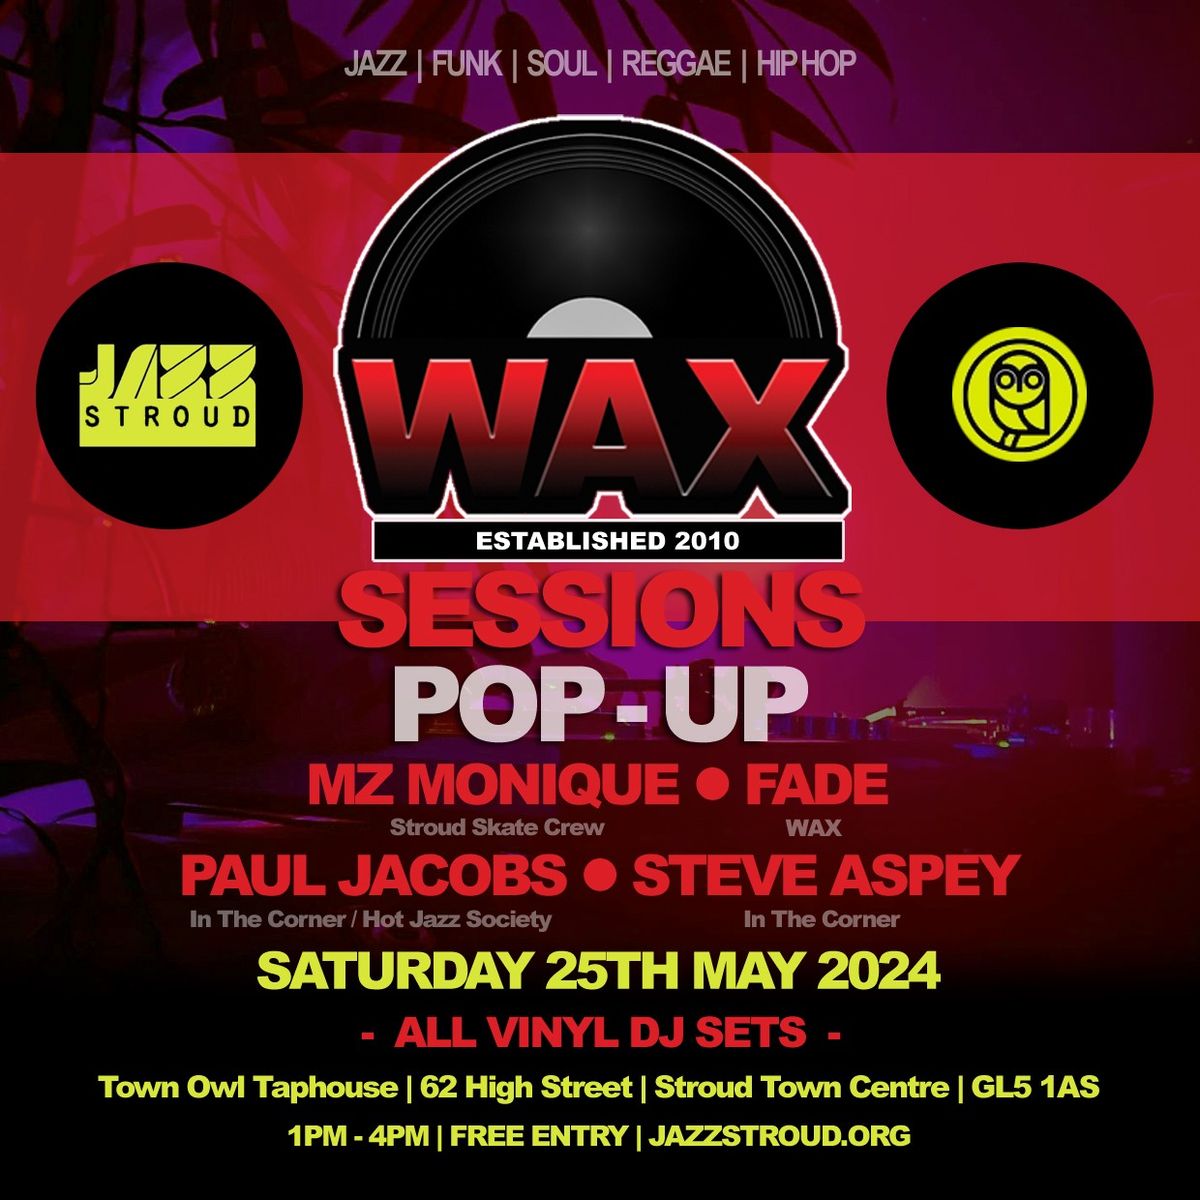 WAX Sessions Pop-Up - Mz Monique - Steve Aspey - Paul Jacobs - Fade - Town Owl Taphouse - 25th May! 